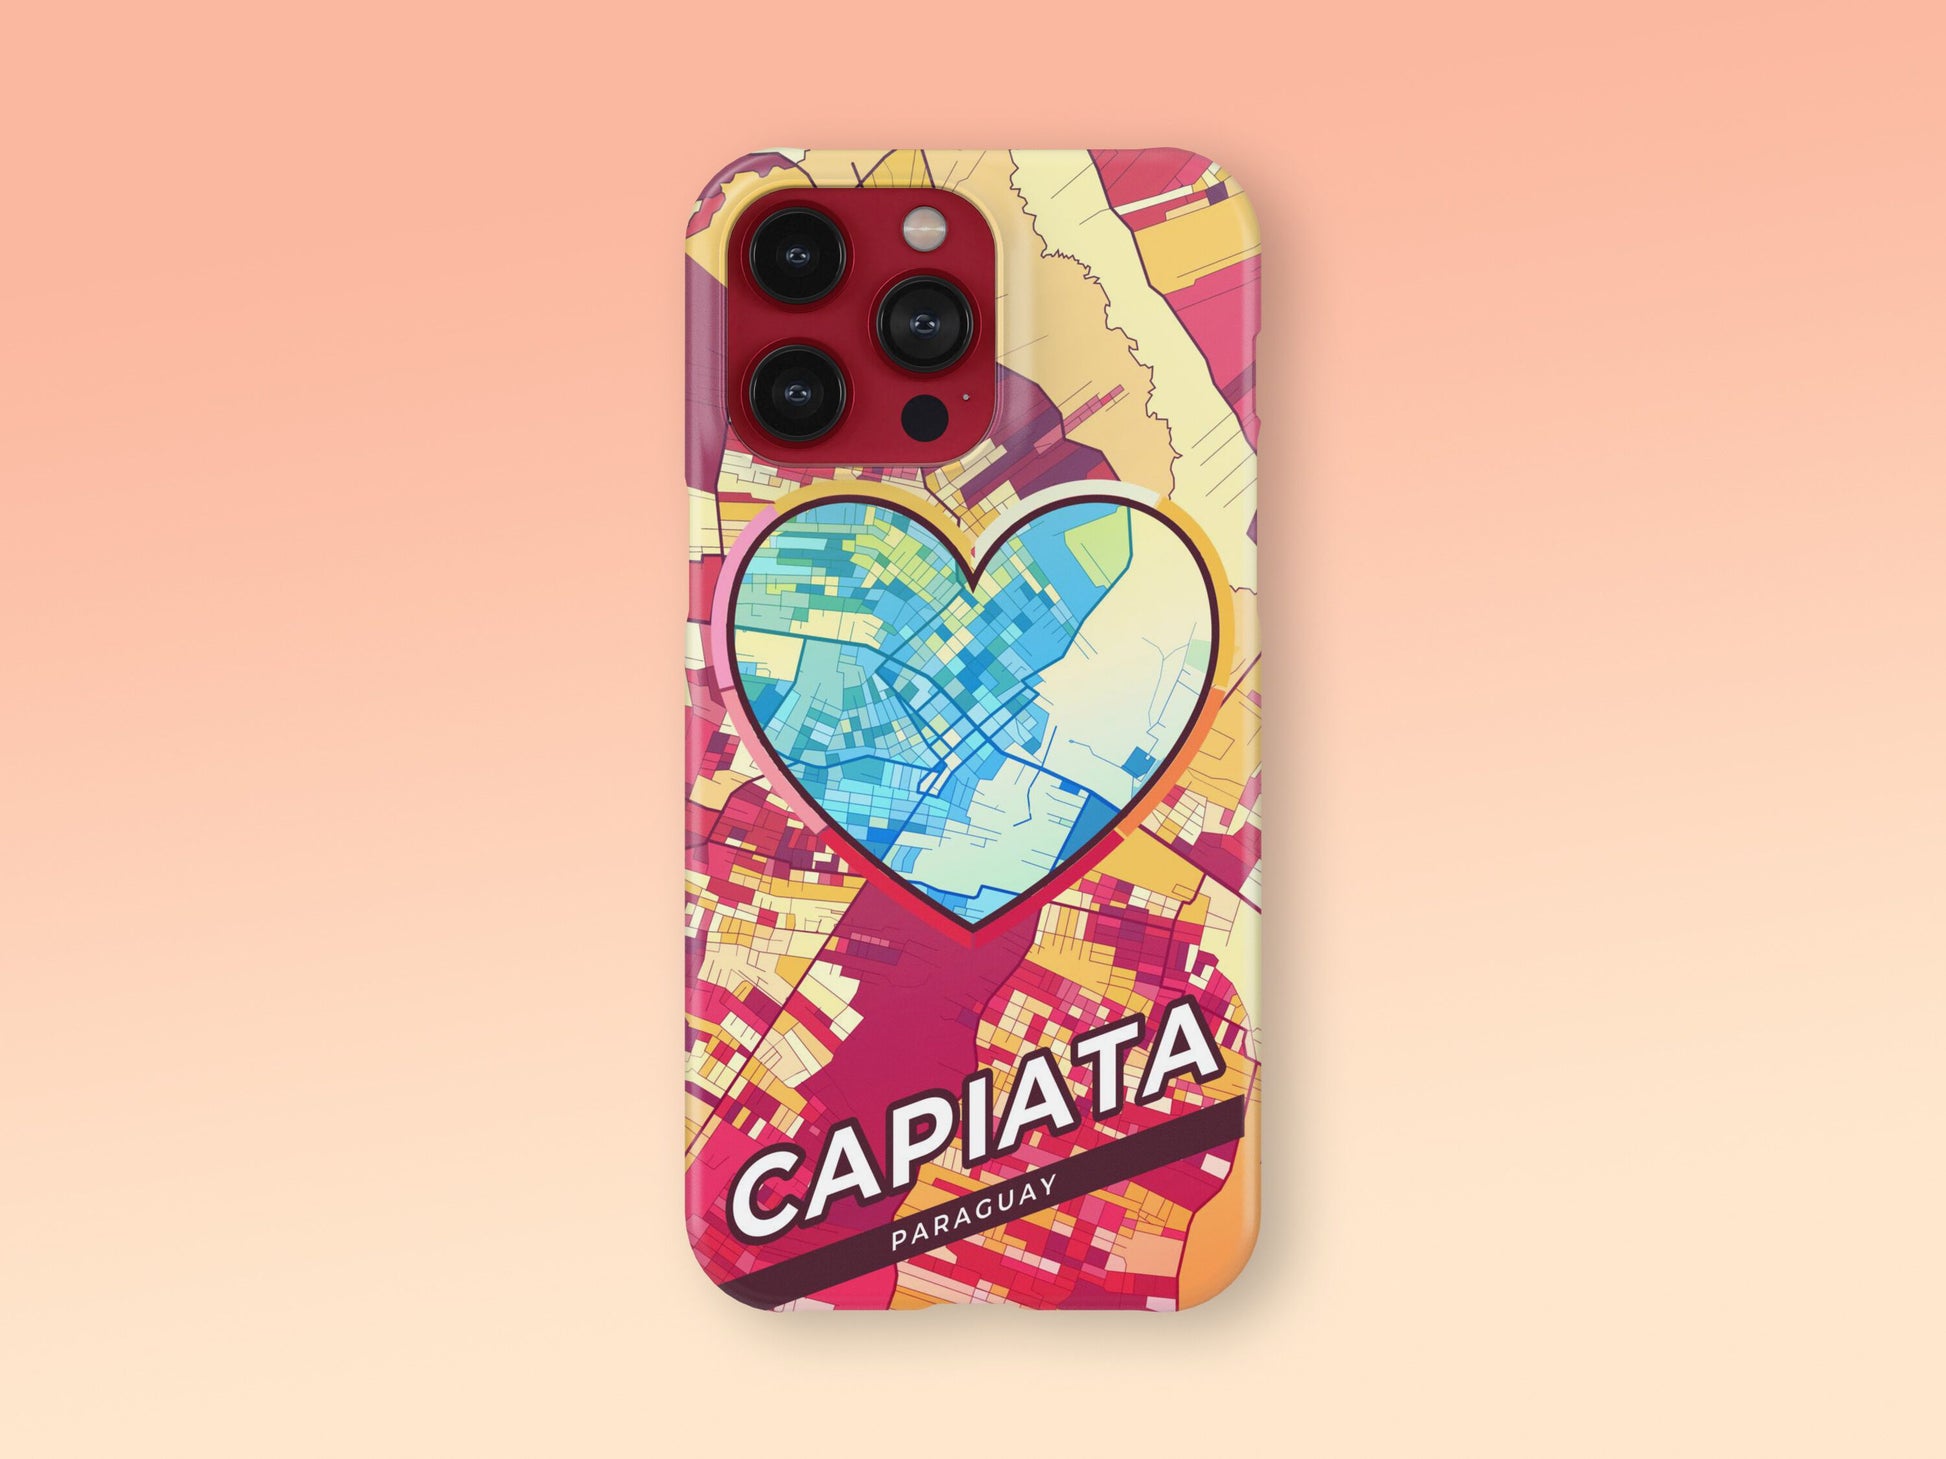 Capiata Paraguay slim phone case with colorful icon. Birthday, wedding or housewarming gift. Couple match cases. 2